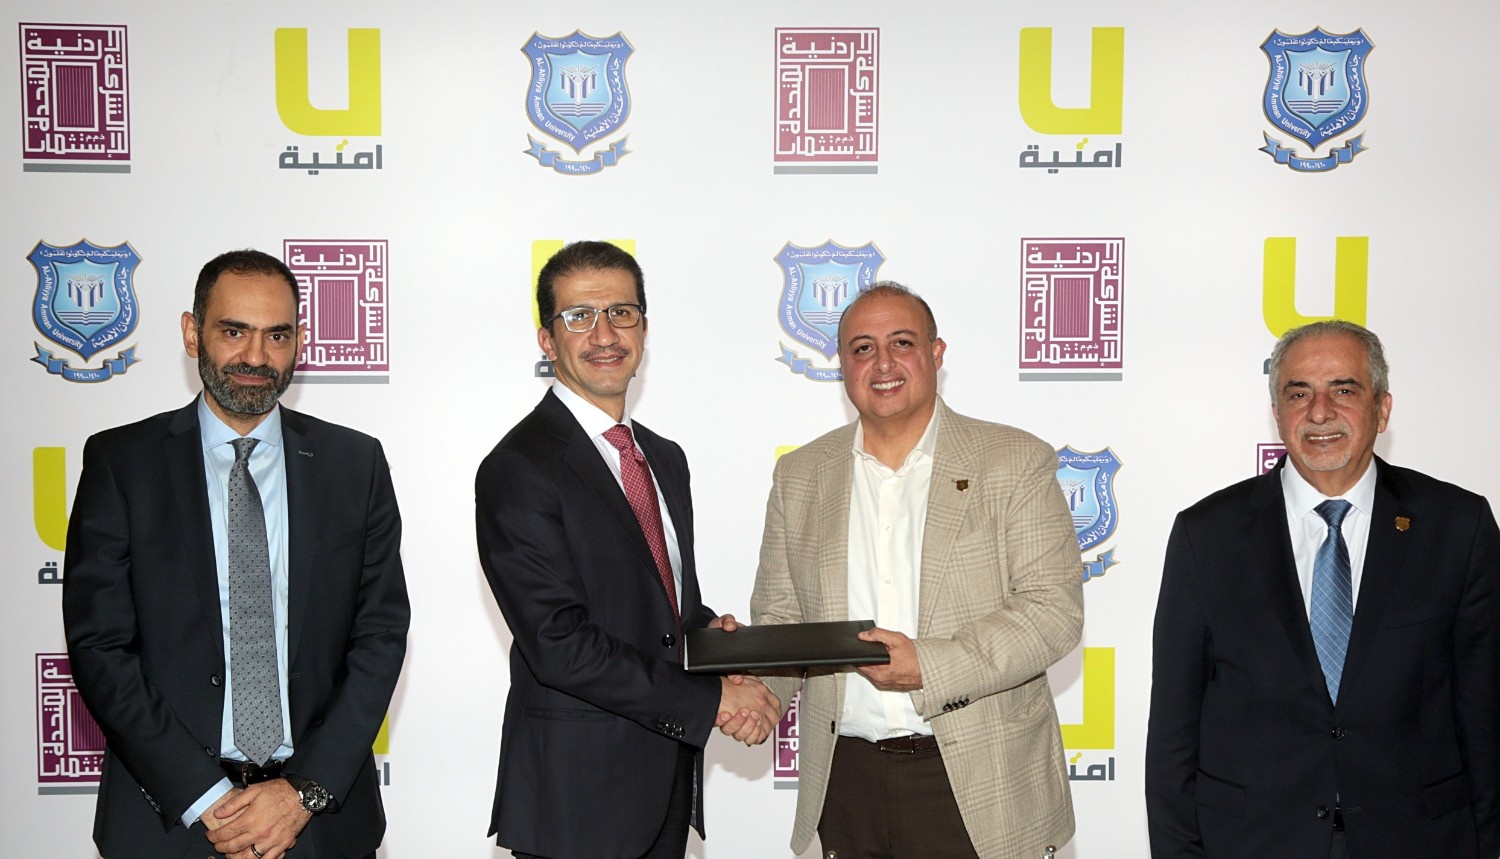 Umniah and Hourani Group Renew Their Partnership for 3 Additional Years